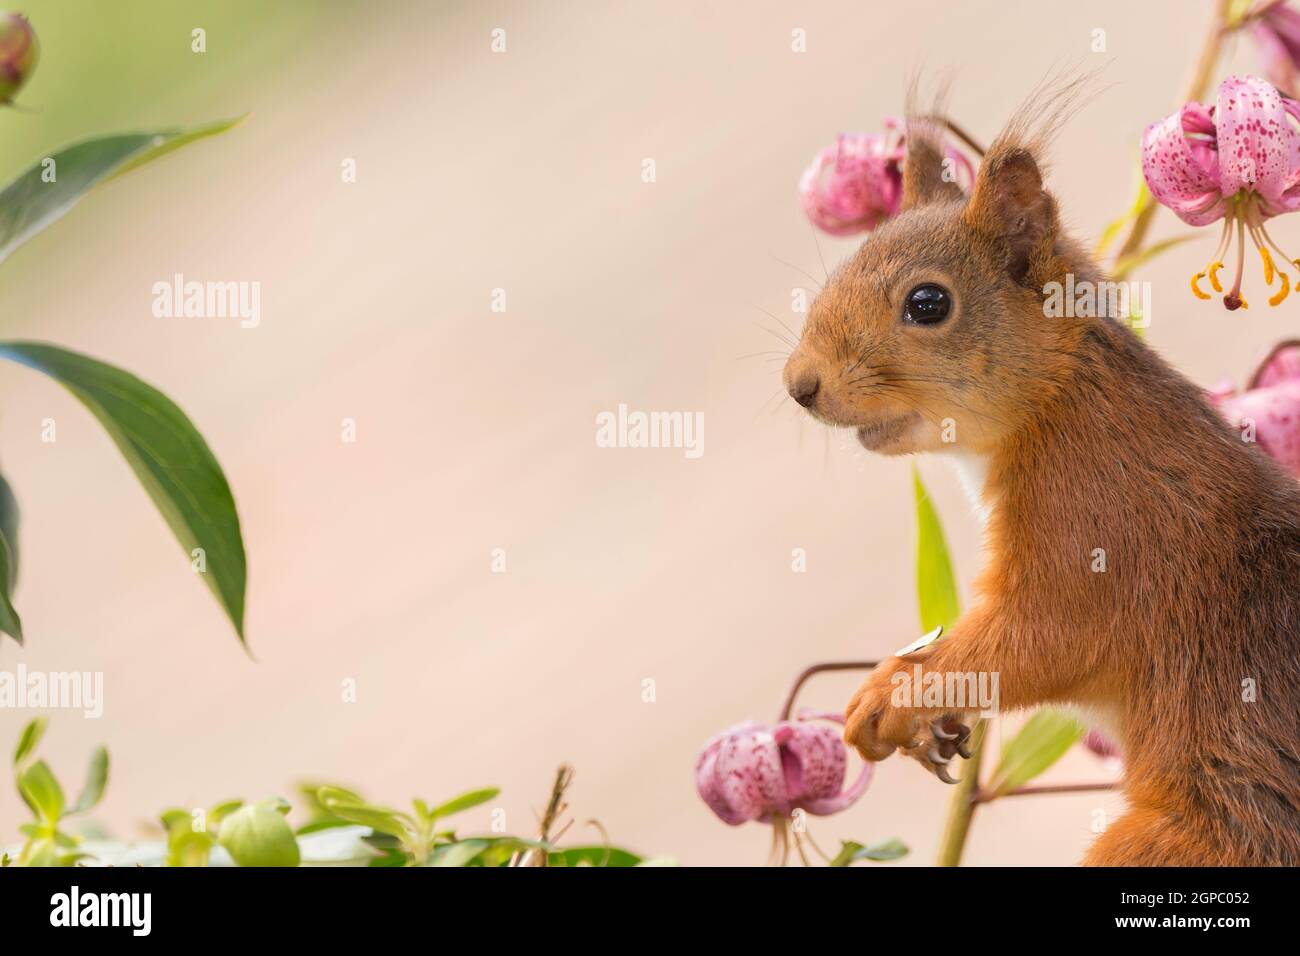 red squirrel standing with lily and leaves Stock Photo